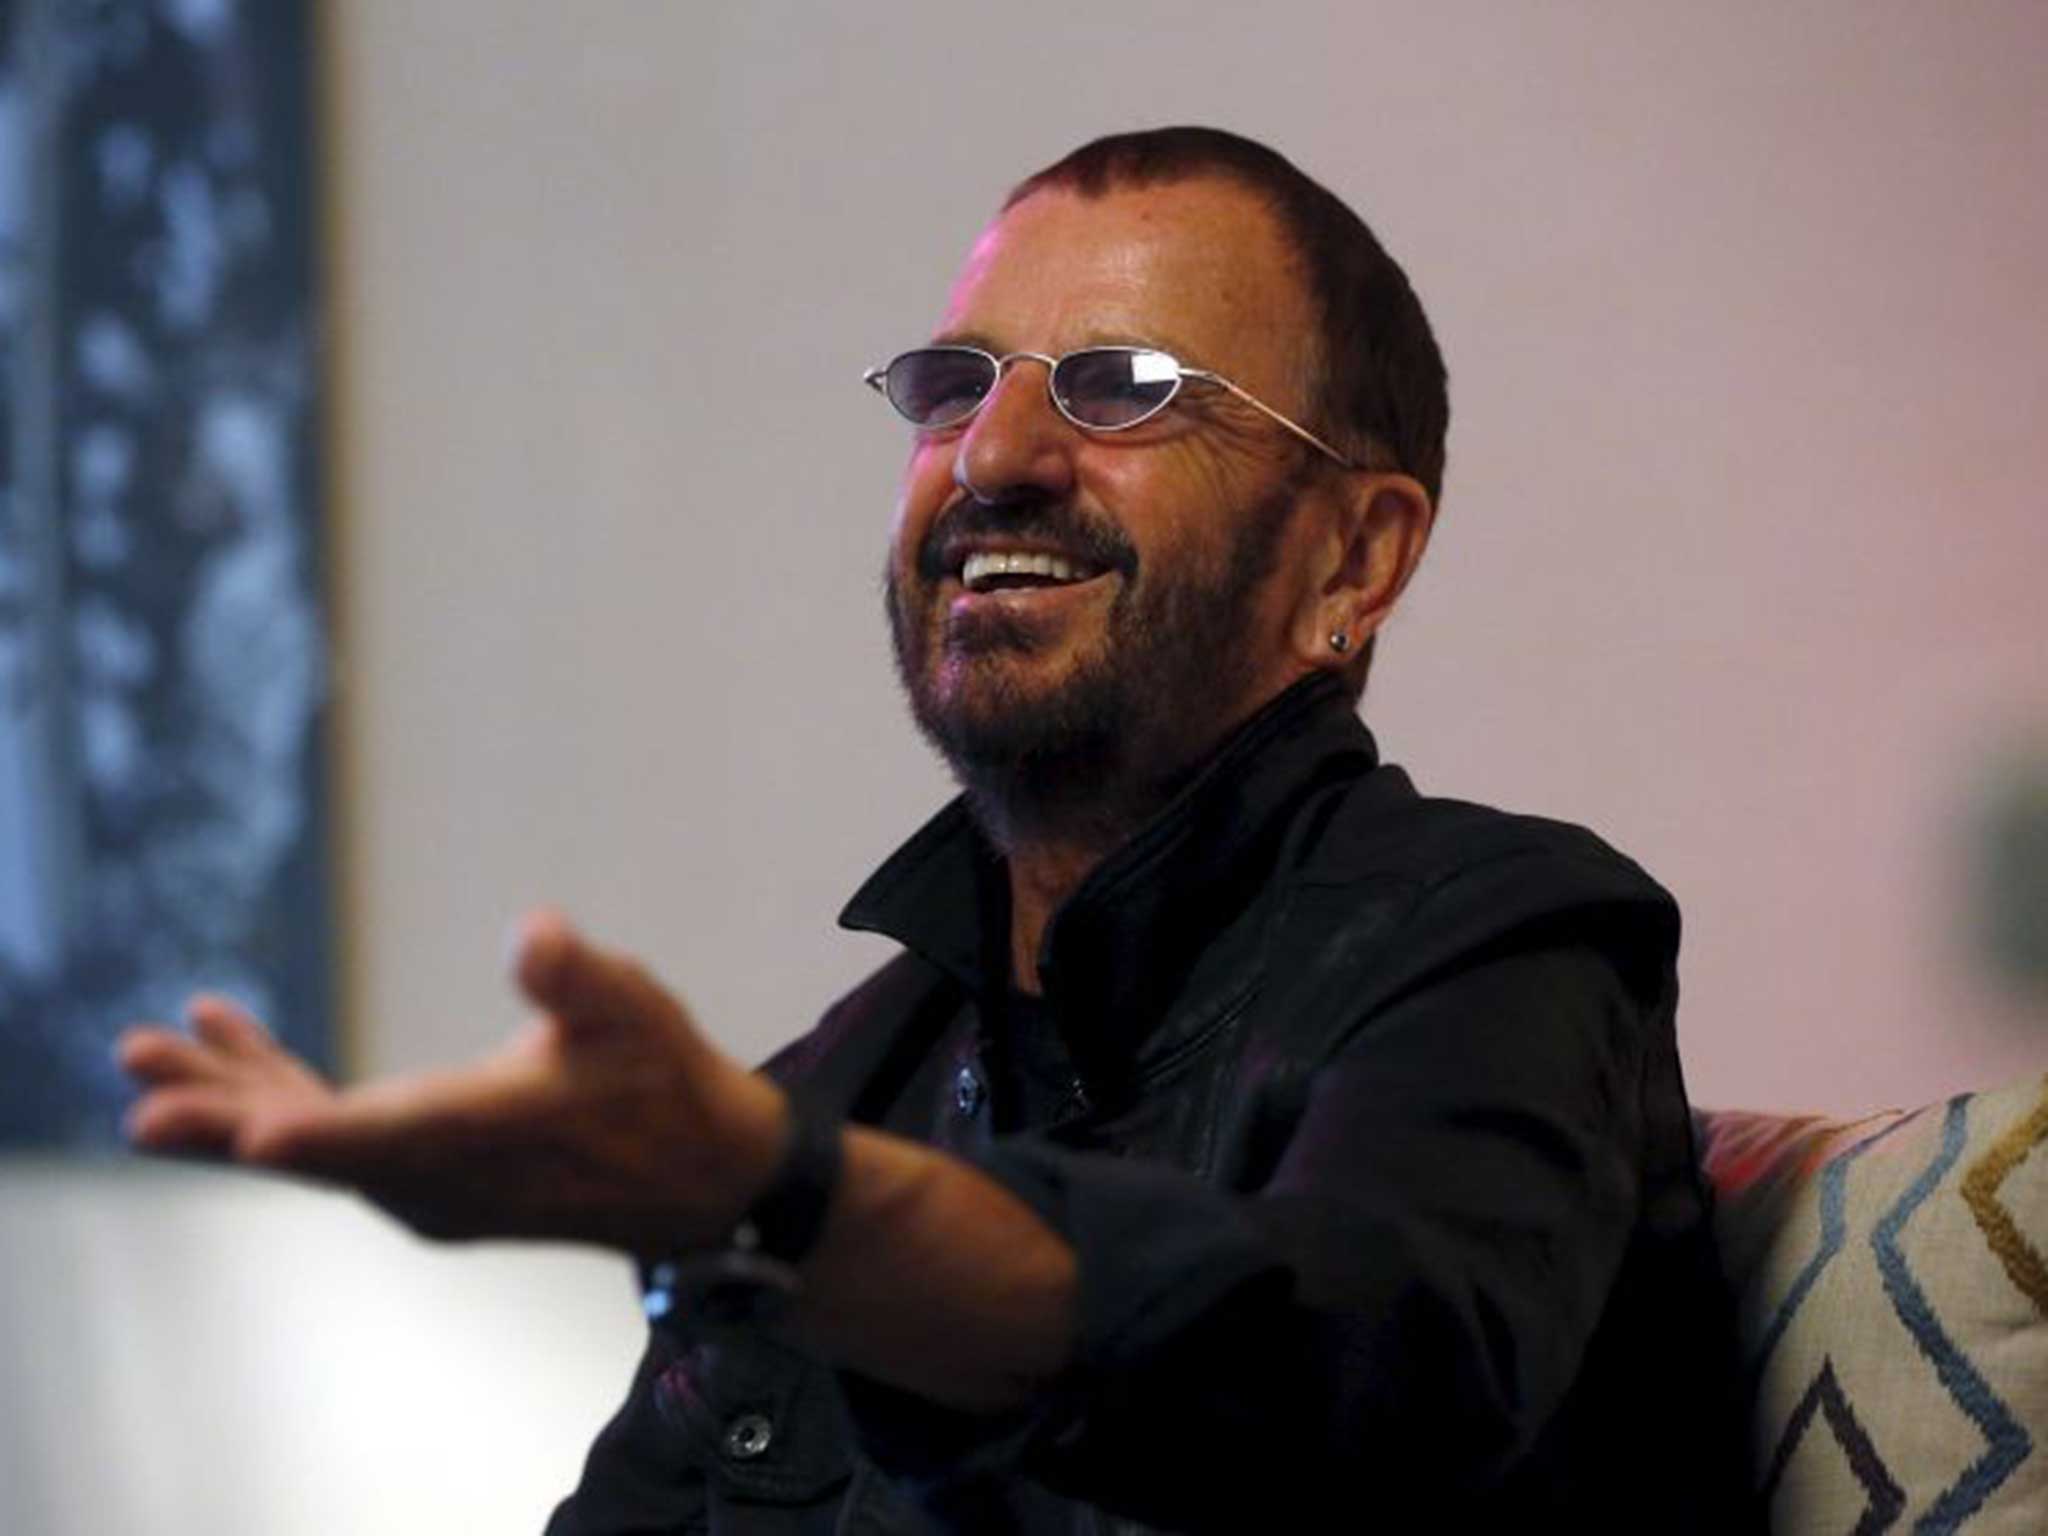 Ringo Starr has spoken about Zayn Malik's decision to leave One Direction